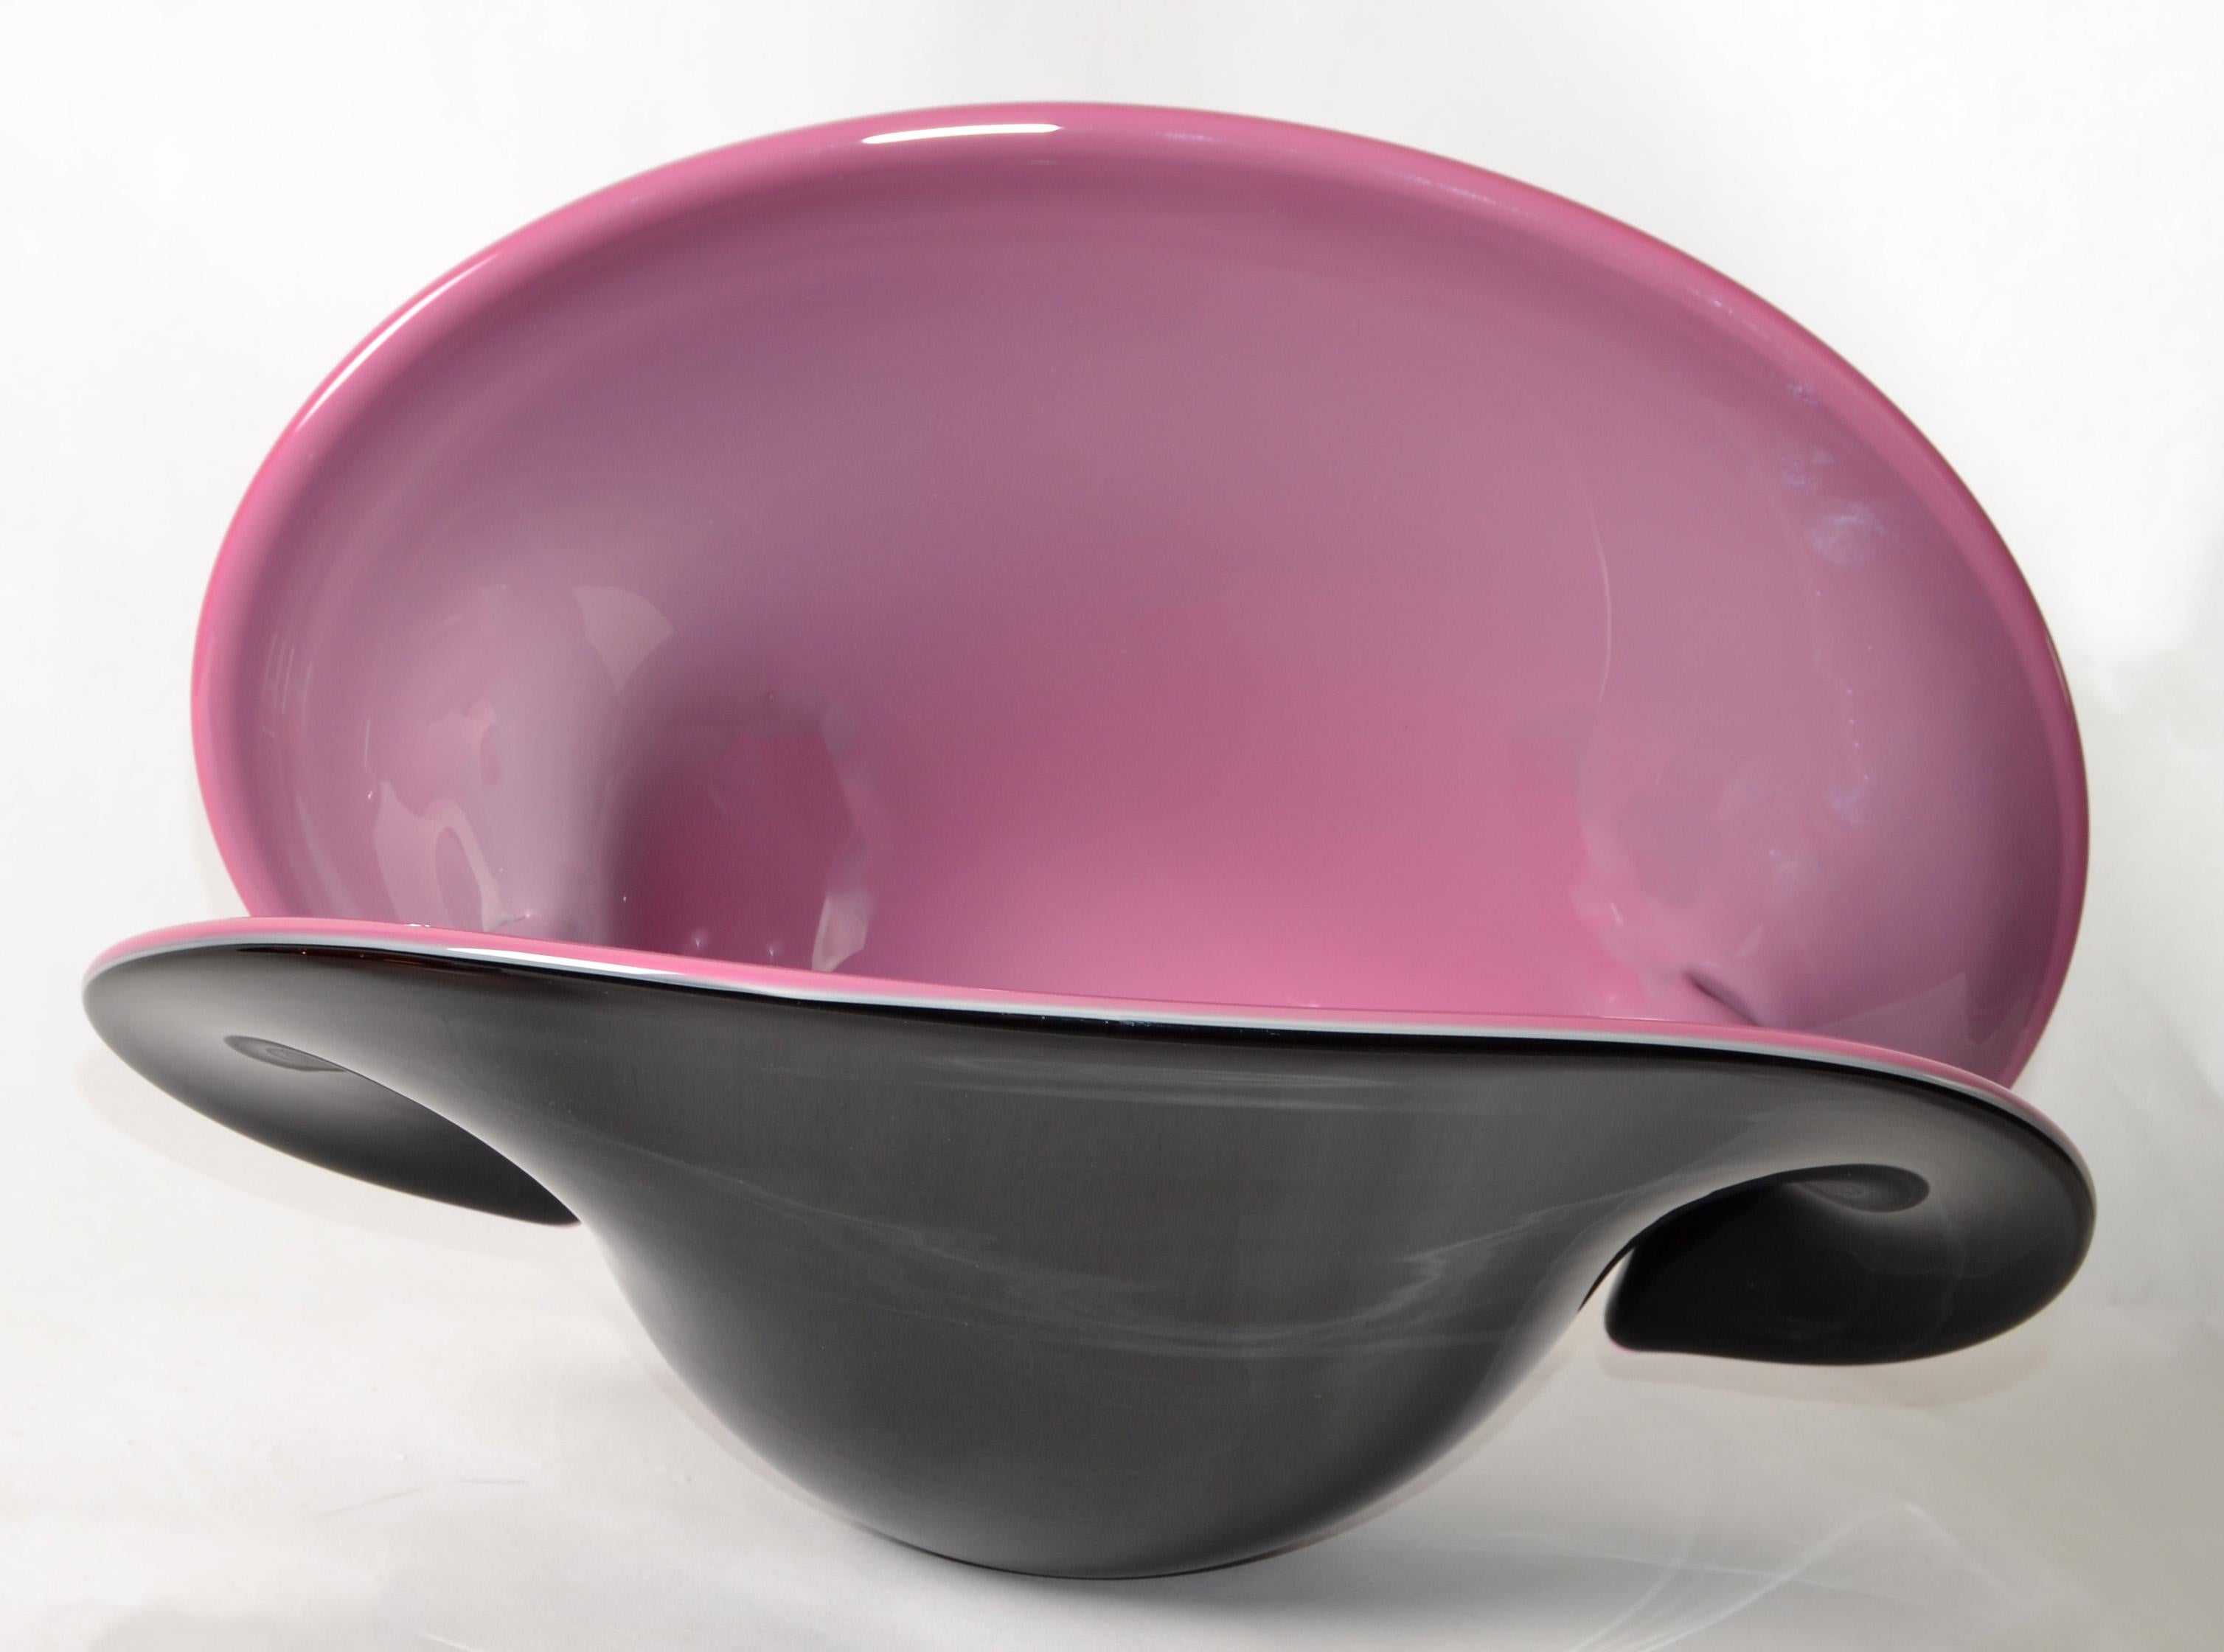 Heavy Venetian Archimede Seguso attributed blown Murano Art Glass made in a Glass Studio similar to Sommerso, circa 1970.
A large shell shaped glass dish, bowl, centerpiece in black and purple from Italy.
There is a thin layer of white glass in